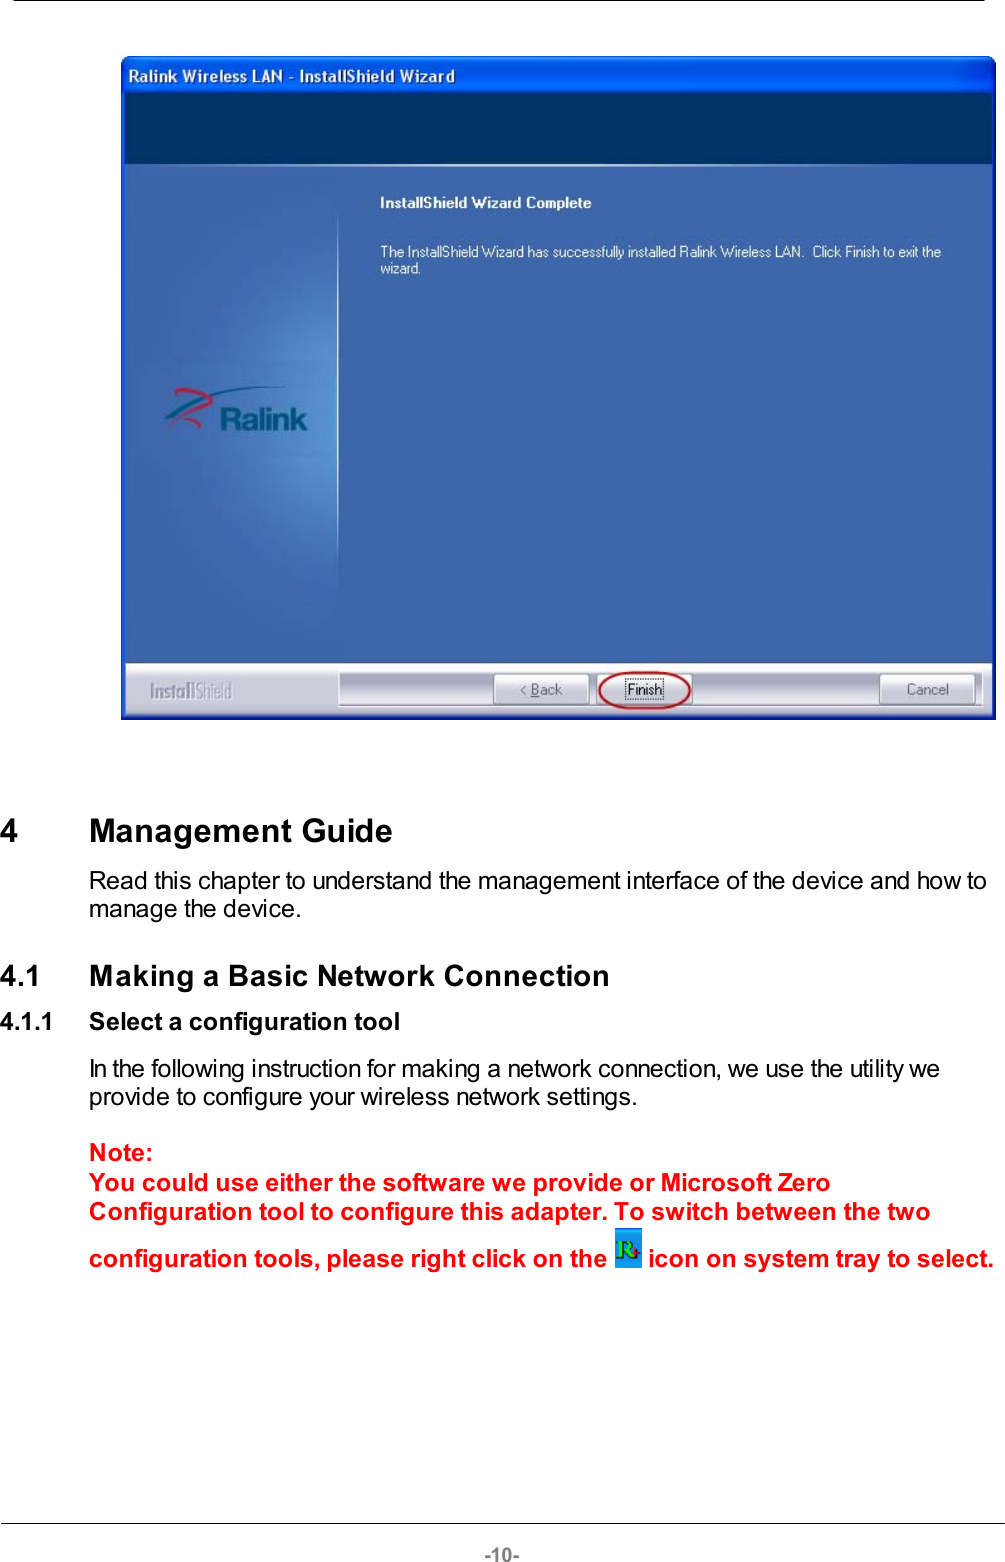 -10-4 Management GuideRead this chapter to understand the management interface of the device and how tomanage the device.4.1 Making a Basic Network Connection4.1.1 Select a configuration toolIn the following instruction for making a network connection, we use the utility weprovide to configure your wireless network settings.Note:You could use either the software we provide or Microsoft ZeroConfiguration tool to configure this adapter. To switch between the twoconfiguration tools, please right click on the   icon on system tray to select.